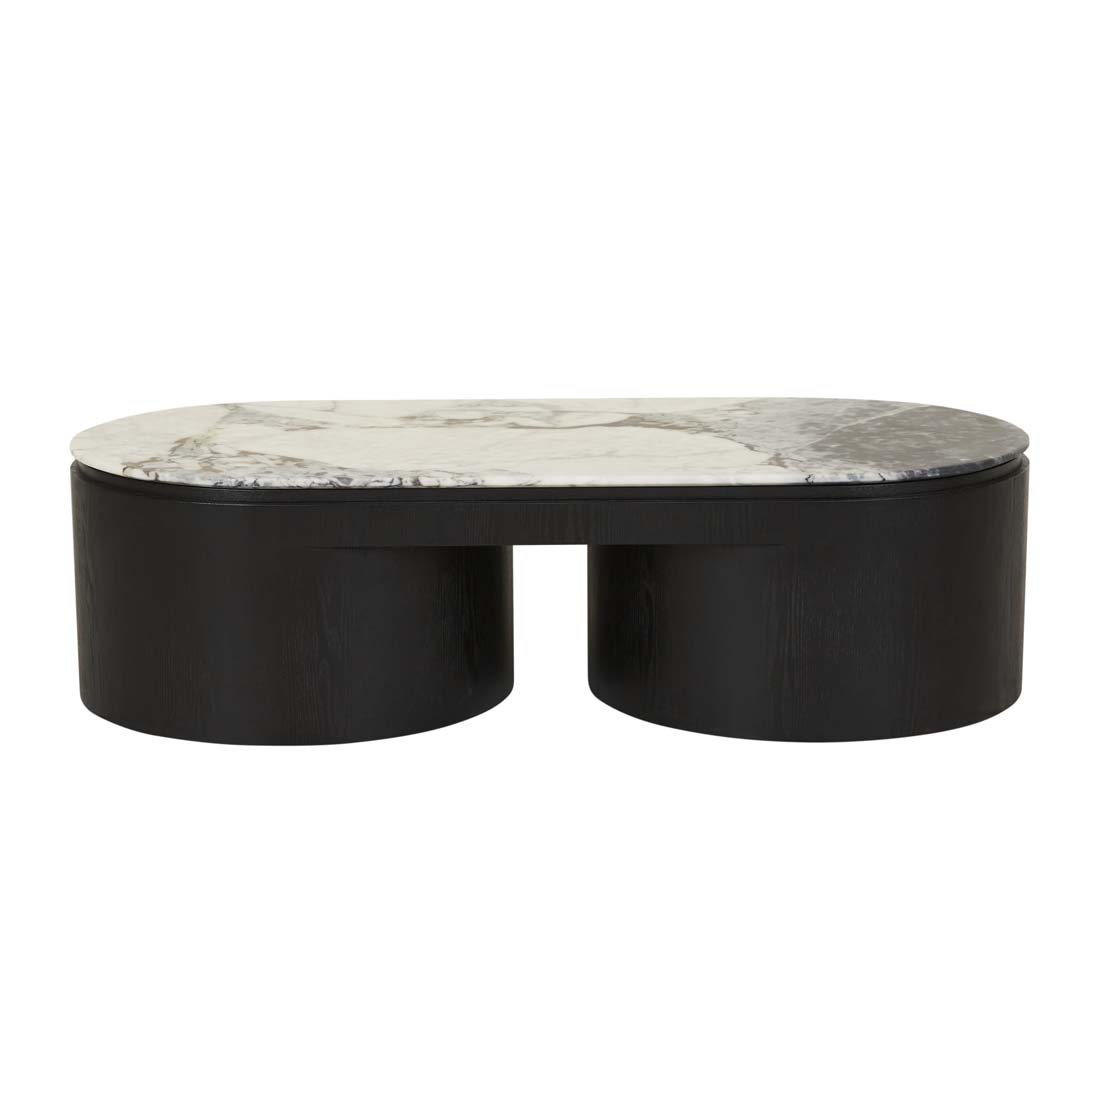 Pluto Oval Marble Coffee Table image 13